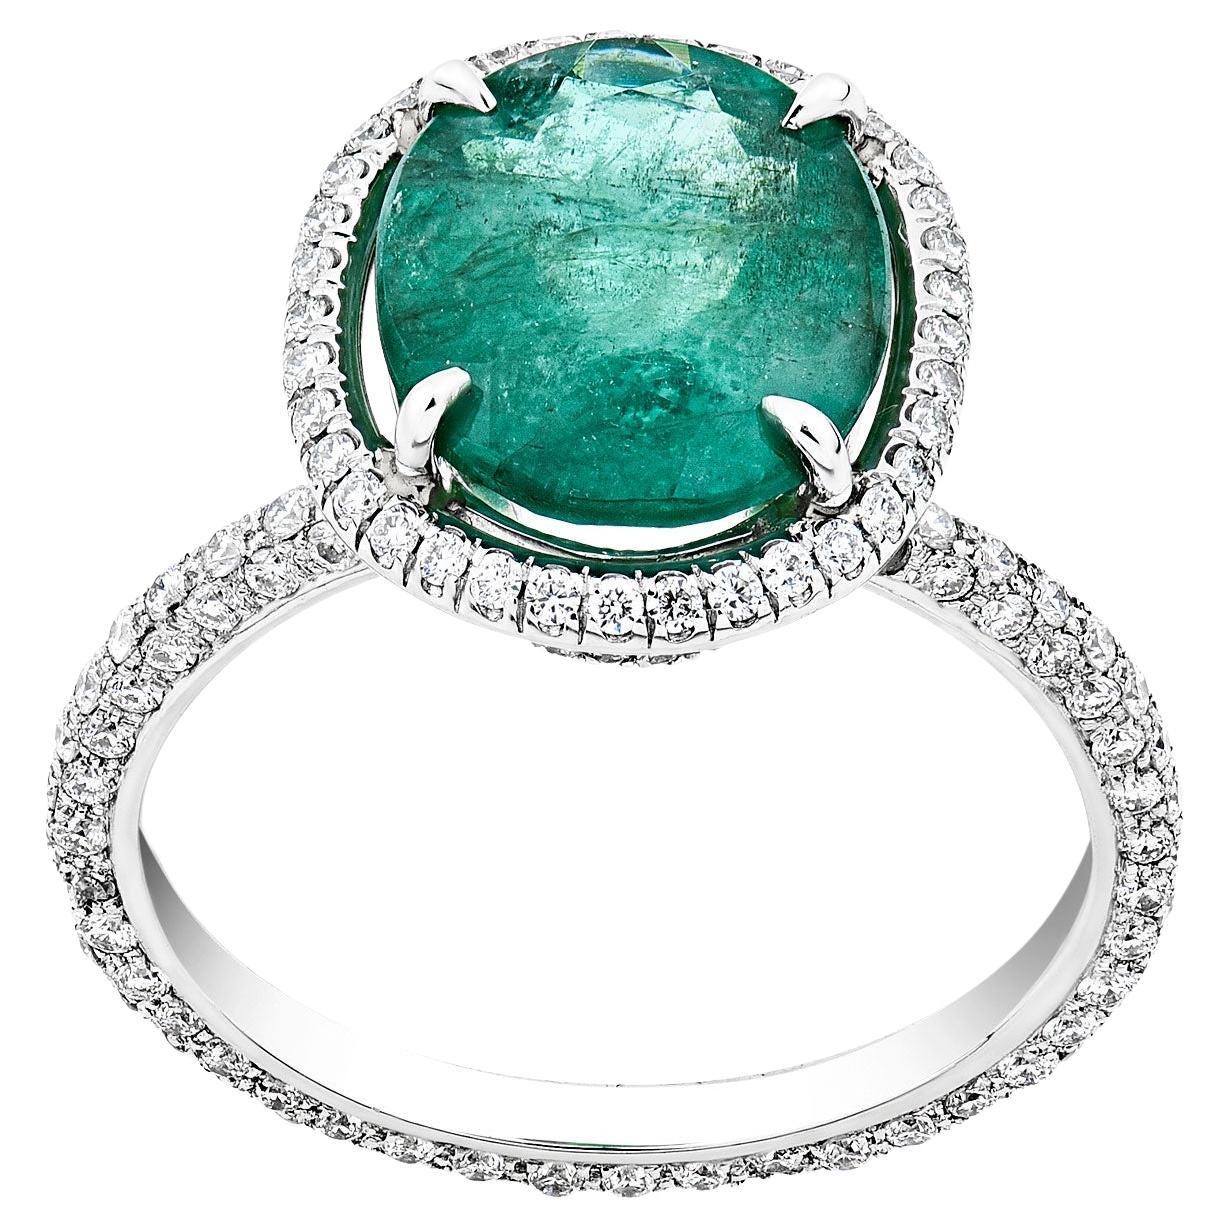 For Sale:  14K White Gold Oval Cut Emerald Center with Diamond Halo